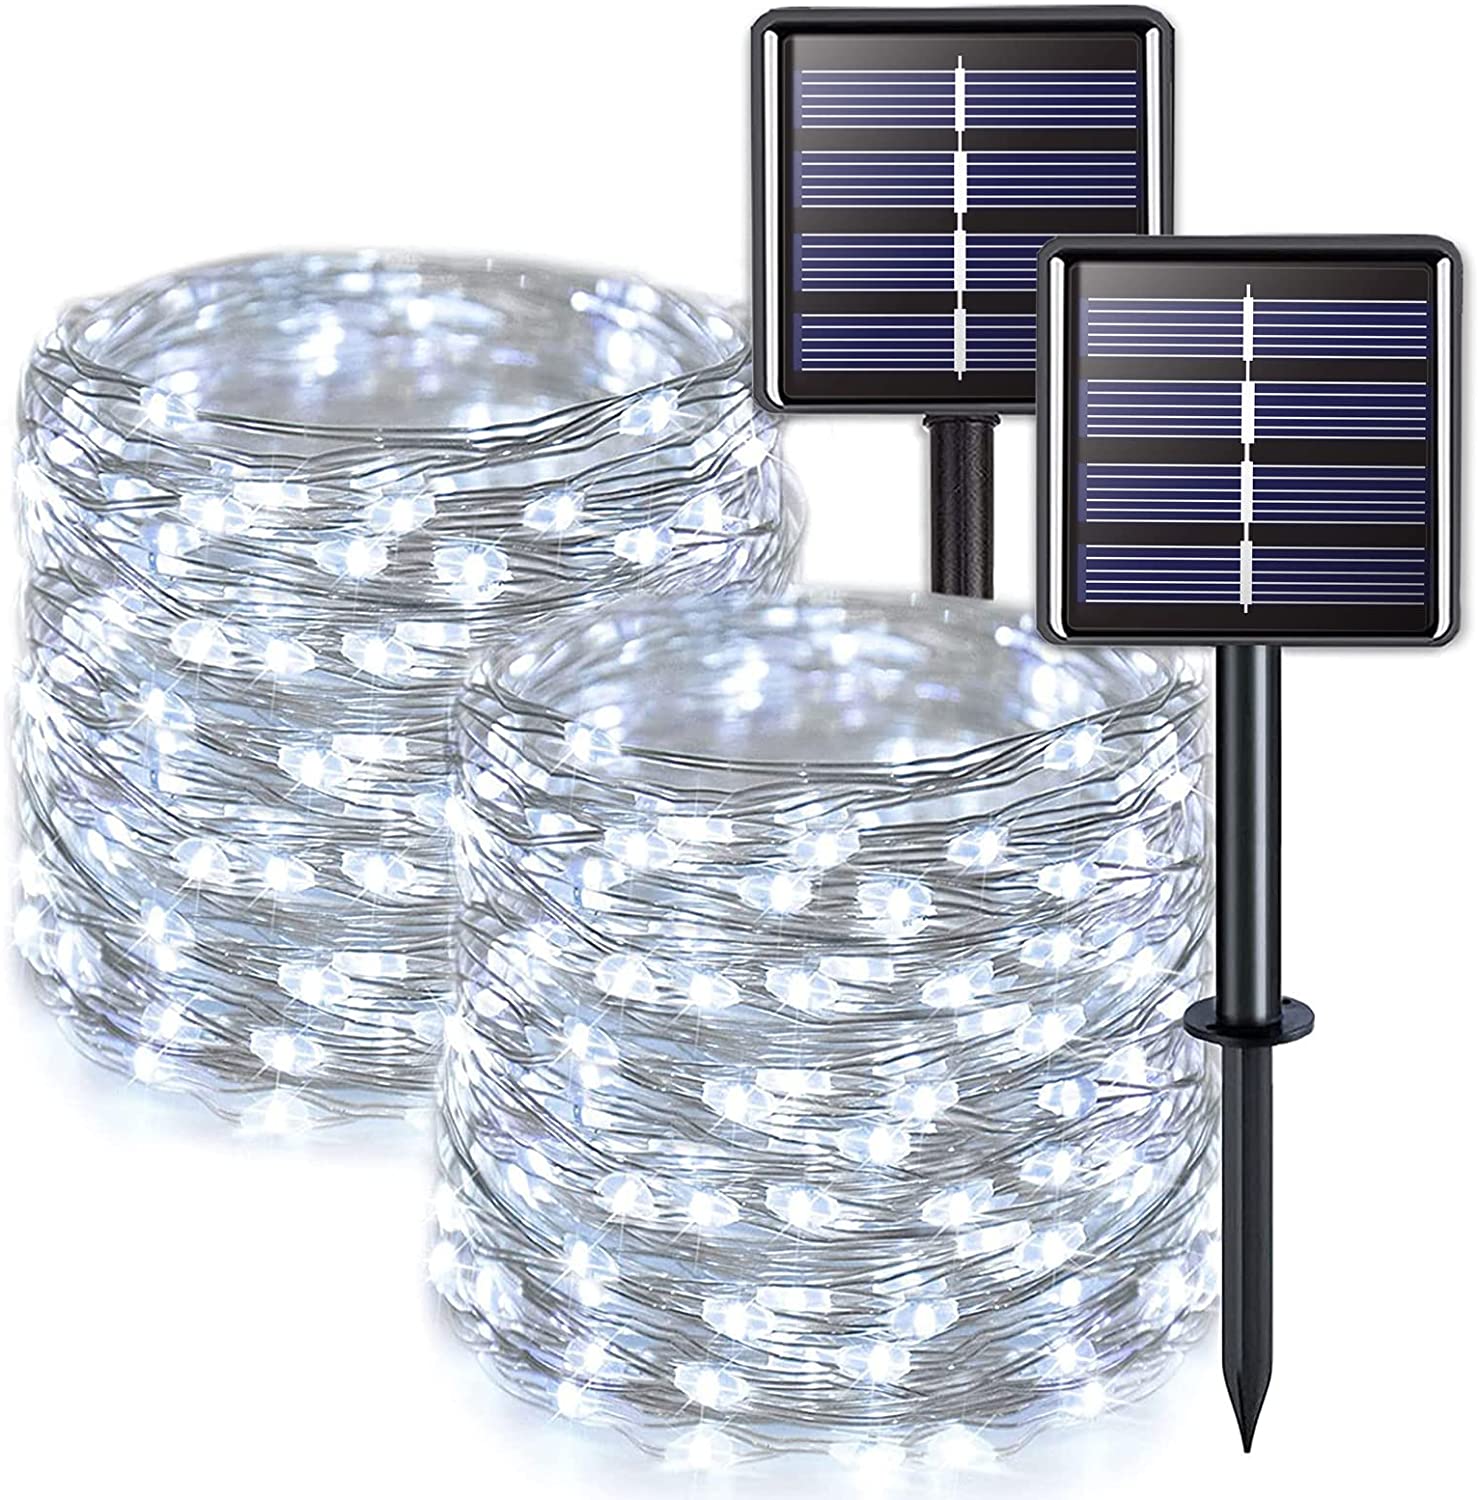 JMEXSUSS White Solar String Lights Outdoor Waterproof, 2 Pack 33ft 100 LED Solar Fairy Lights, 8 Modes Copper Wire Solar Christmas Lights for Patio Tree Garden Outside Decorations - image 1 of 3